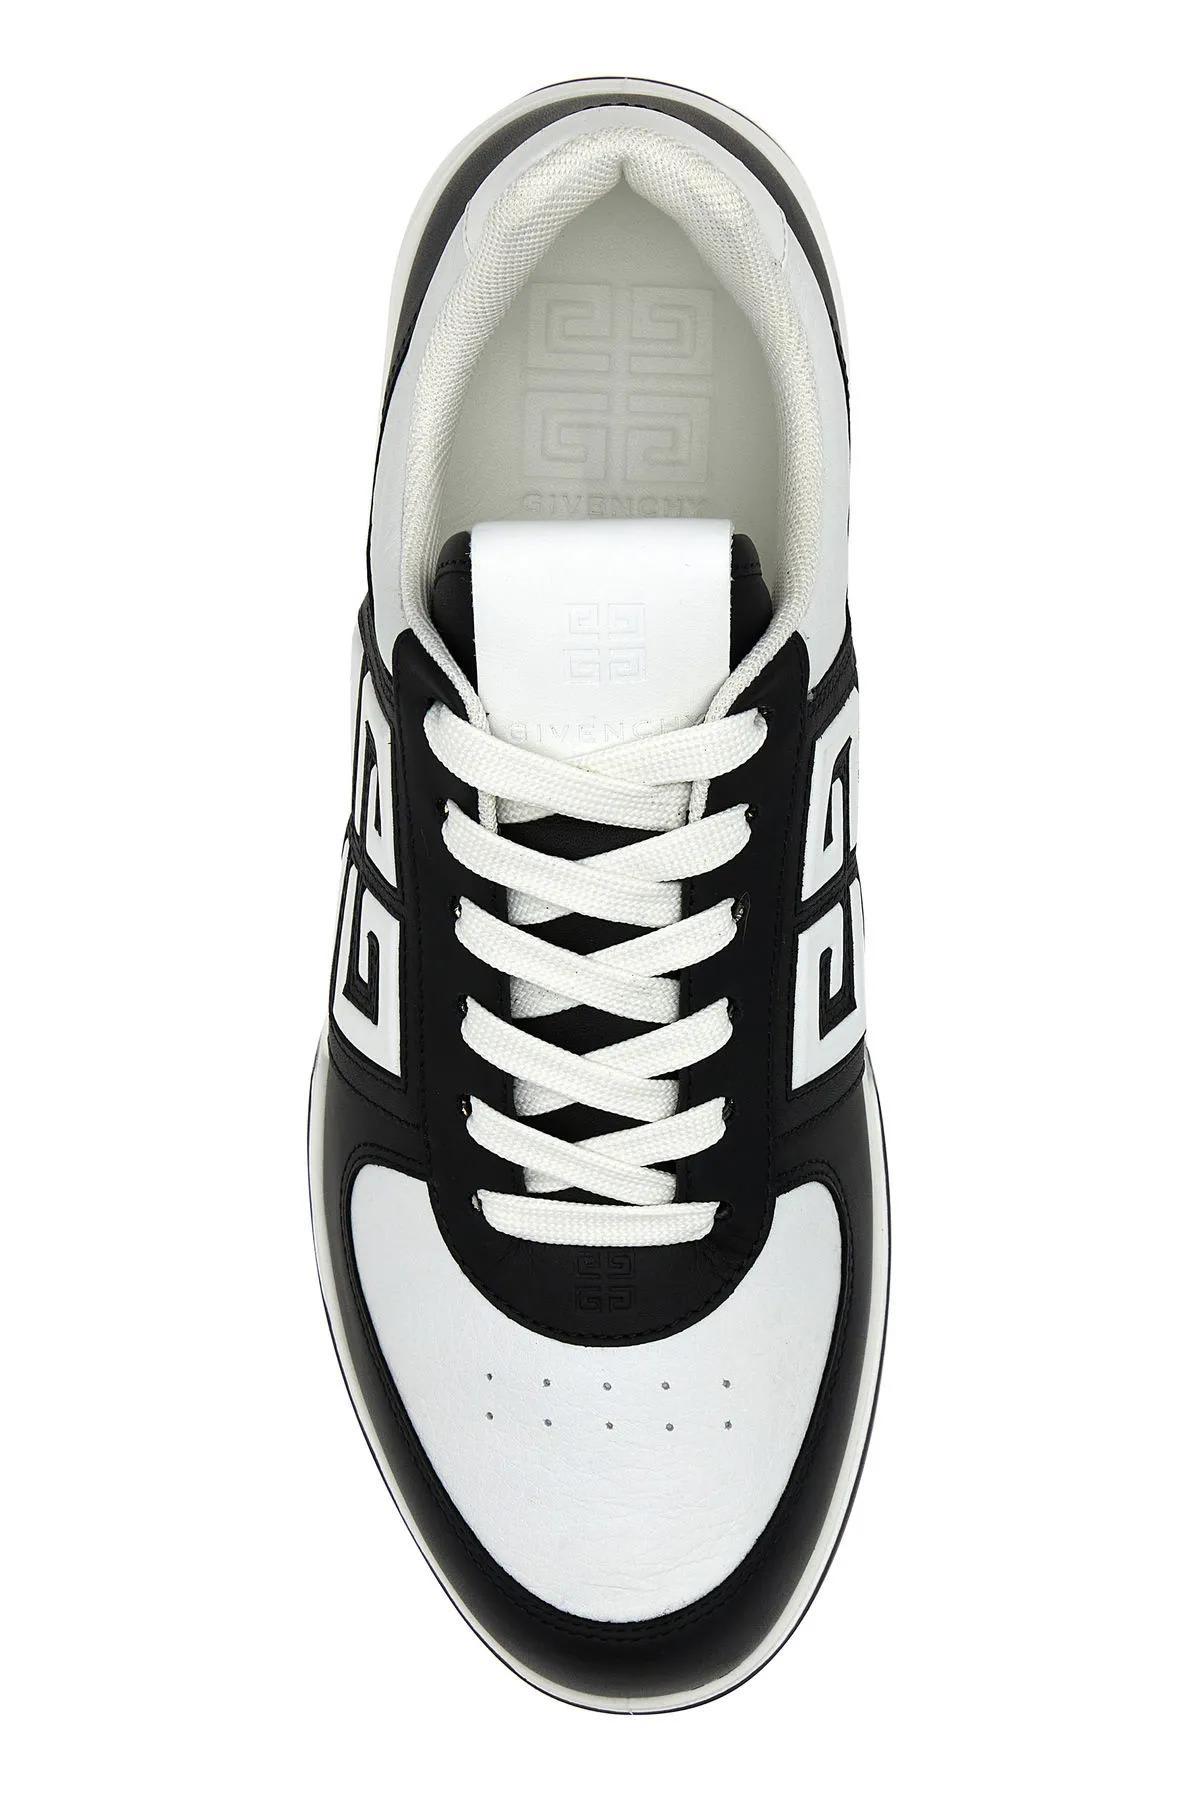 Givenchy Two-tone Leather G4 Sneakers in White | Lyst